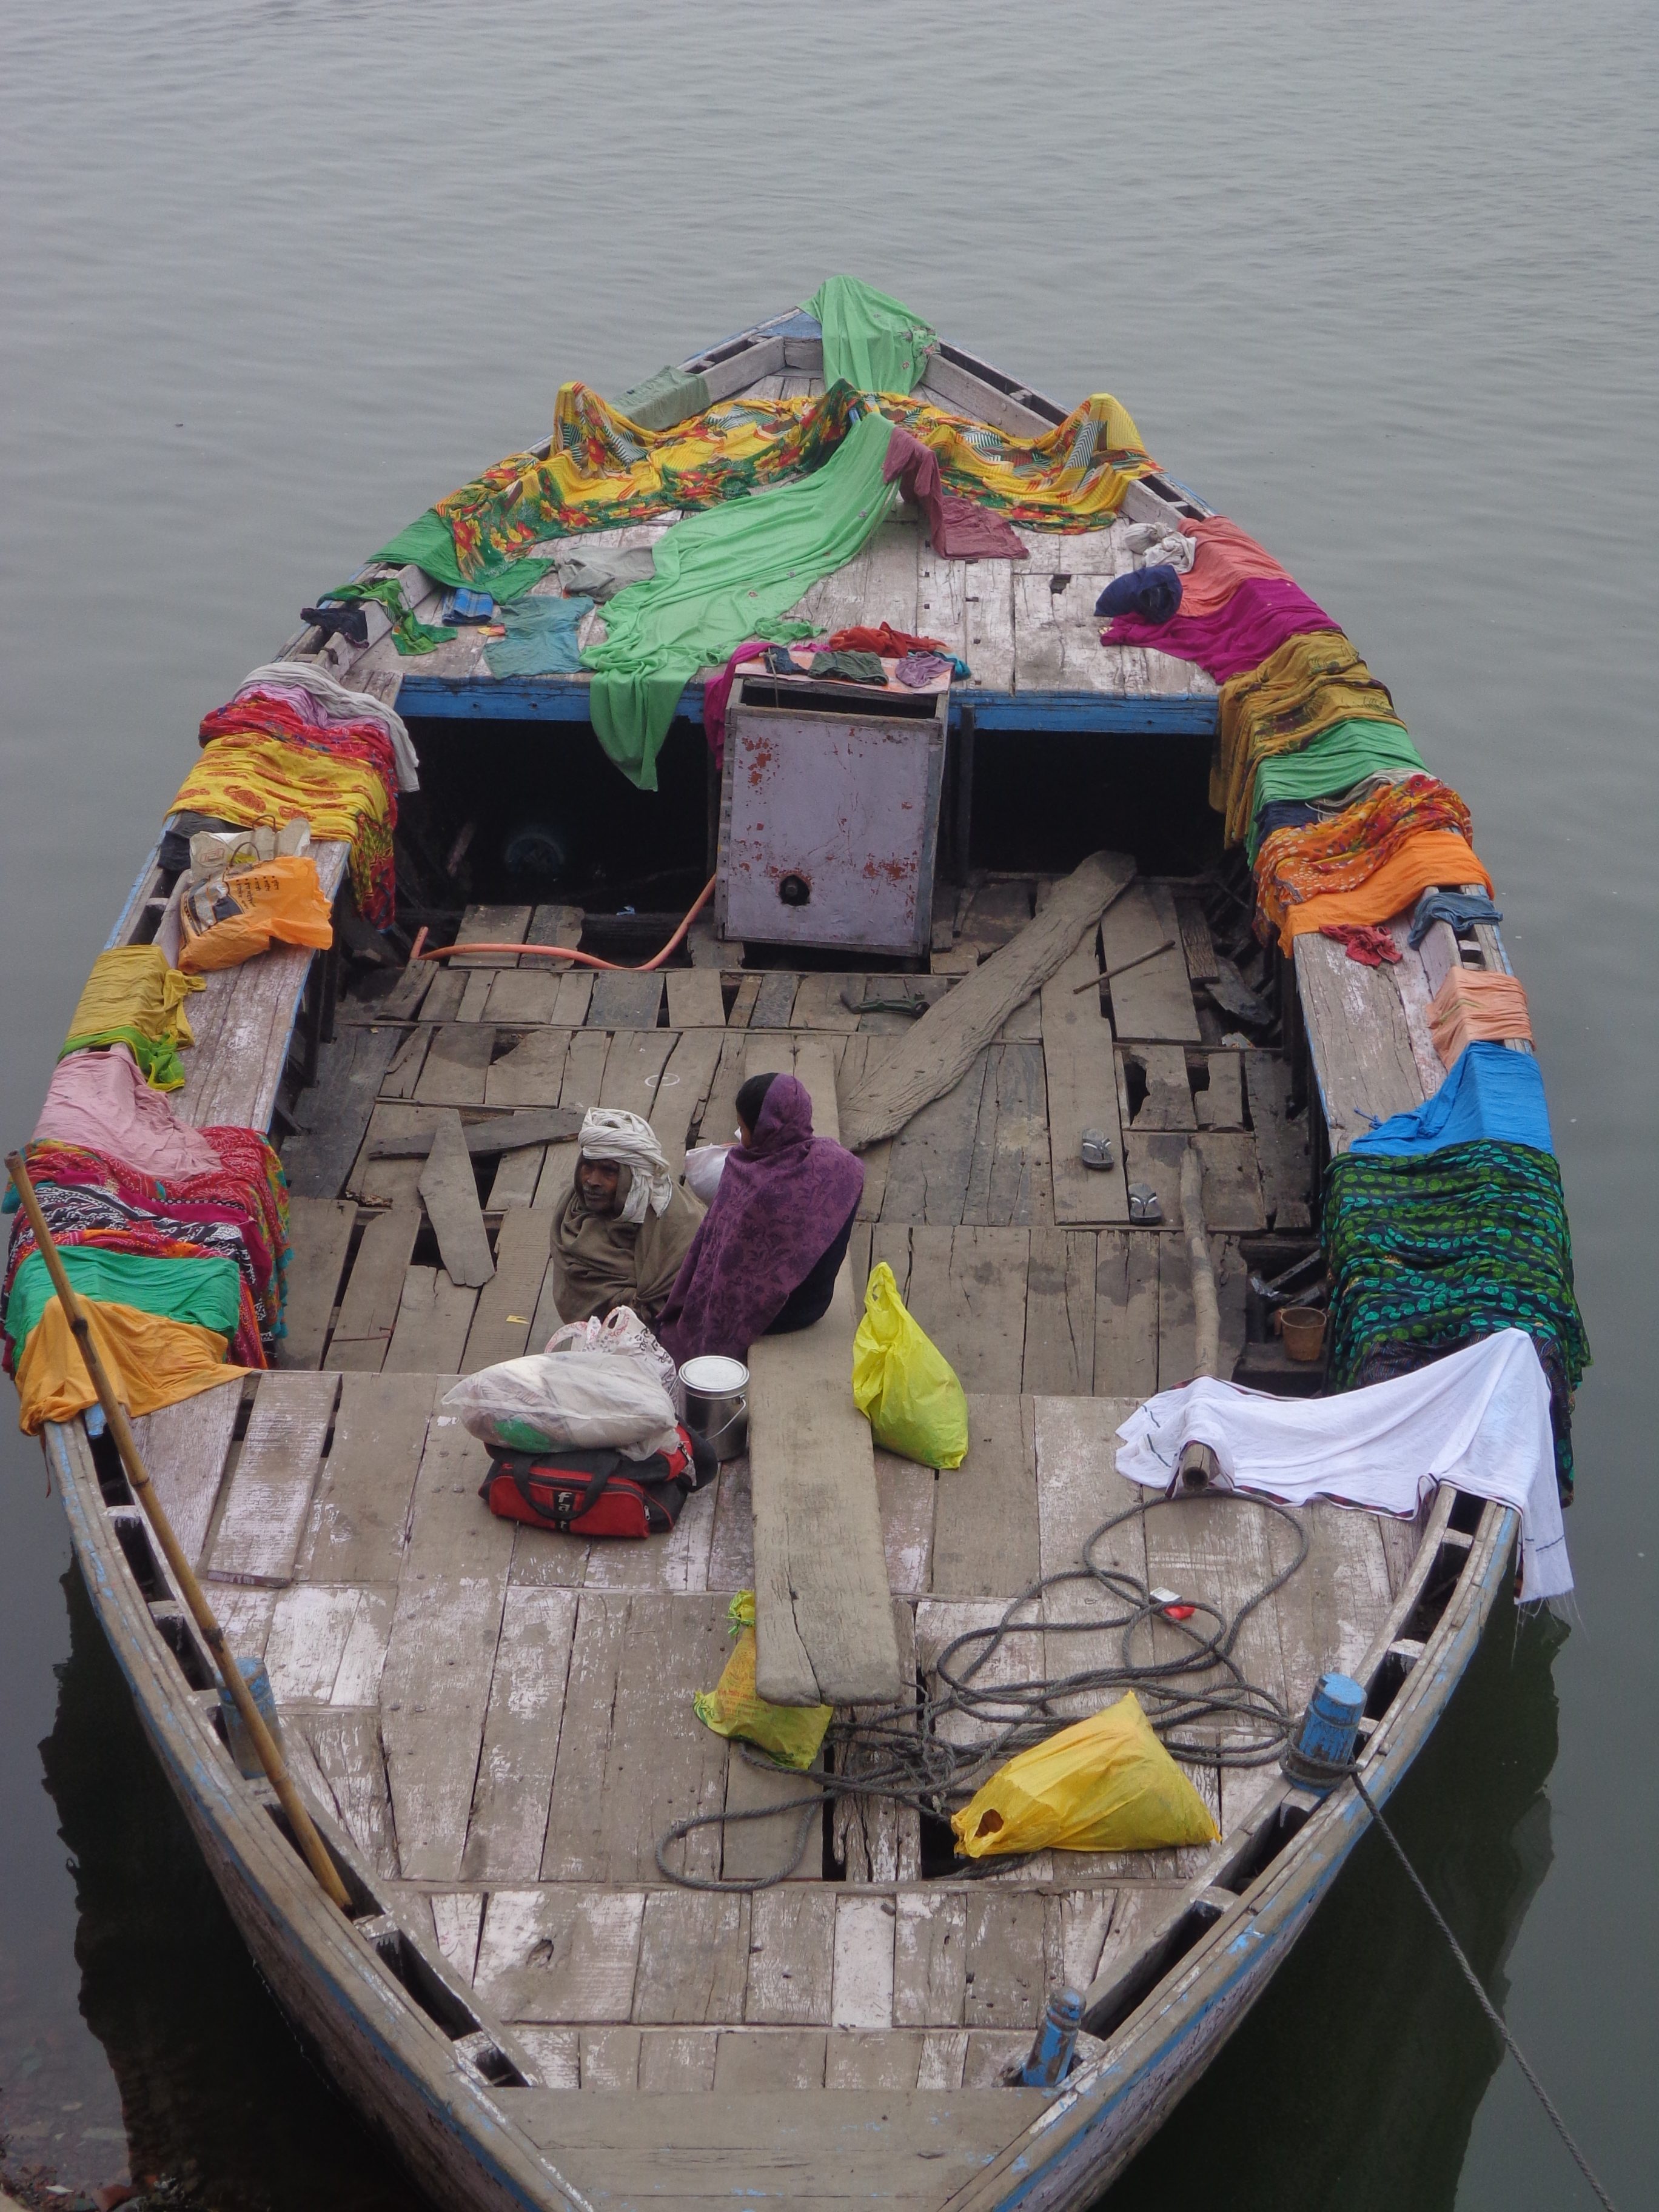 LOCAL LIFE. Locals live off the Ganges to support their way of life and is an integral part of their daily routine. 